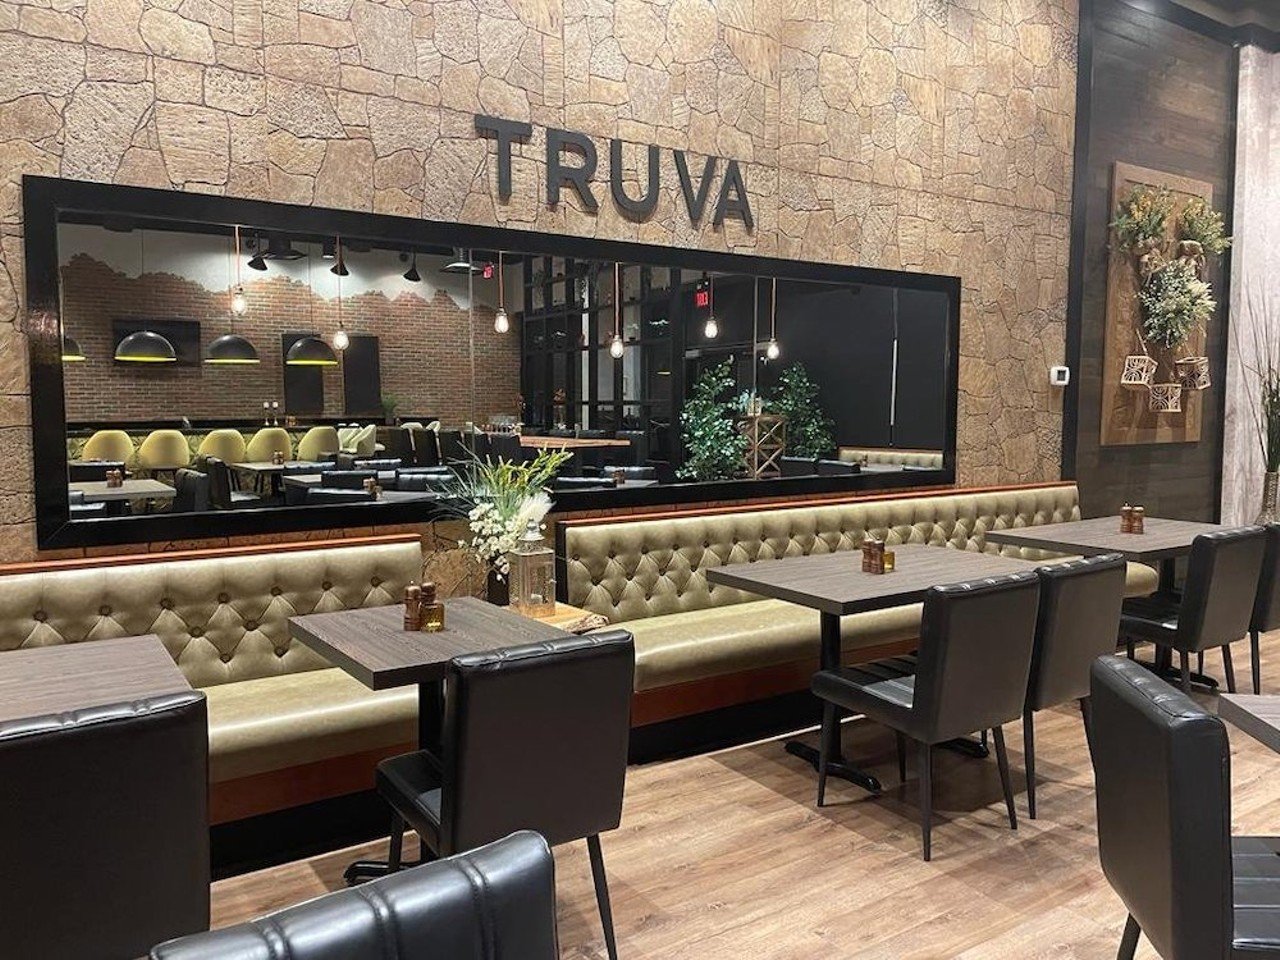 24. Truva Turkish Kitchen
8060 Montgomery Road, Suite 400, Kenwood
“Wow. This place is exquisite! The service is great and they are friendly. The ambiance is elegant and welcoming. The food is phenomenal! We went twice within a week. The first time just to try it and the second to bring my family from out of town. We told them it's a must try while they were visiting. We live about 25-30 min away but it's one of our new favorite places to go in Kenwood. The appetizer and the platters for 2 or 4 were a nice variety of the menu and plenty of food. It all tasted very fresh. The chicken kebab the first time was dried out and a little hard. But the second time we went it was very good. So maybe it was just a off day the first time. Highly recommend this spot and wish they had one closer!" -Stephanie W.